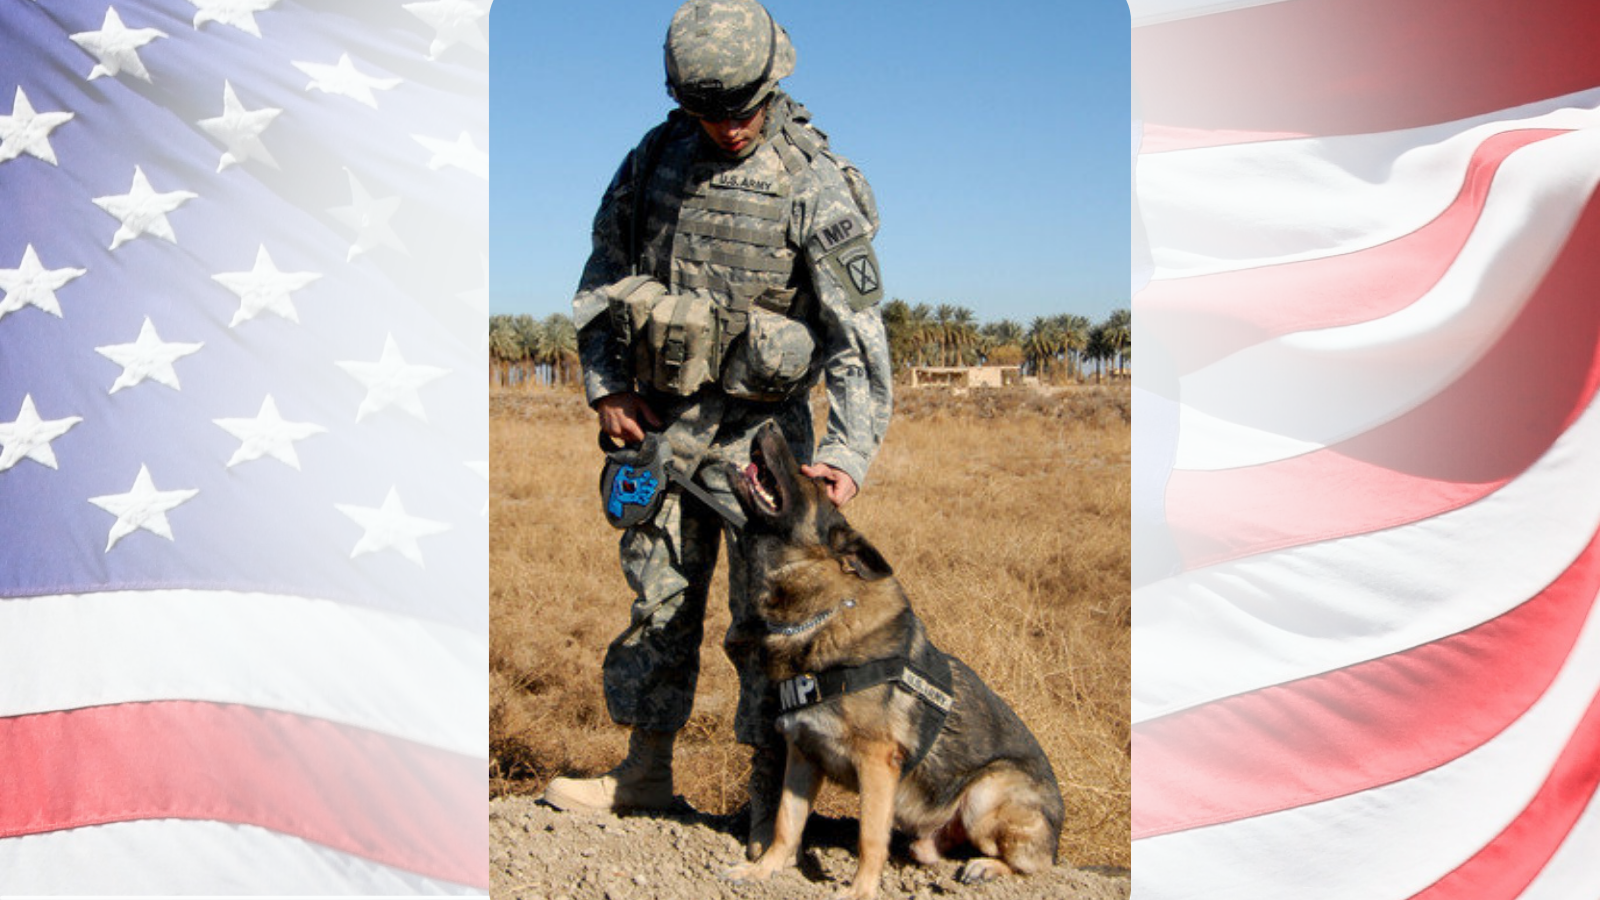 K9 VETERANS DAY: SOC CANINE HANDLER SHARES HEROIC EXPERIENCE WITH HIS CANINE ‘SAVIOR’